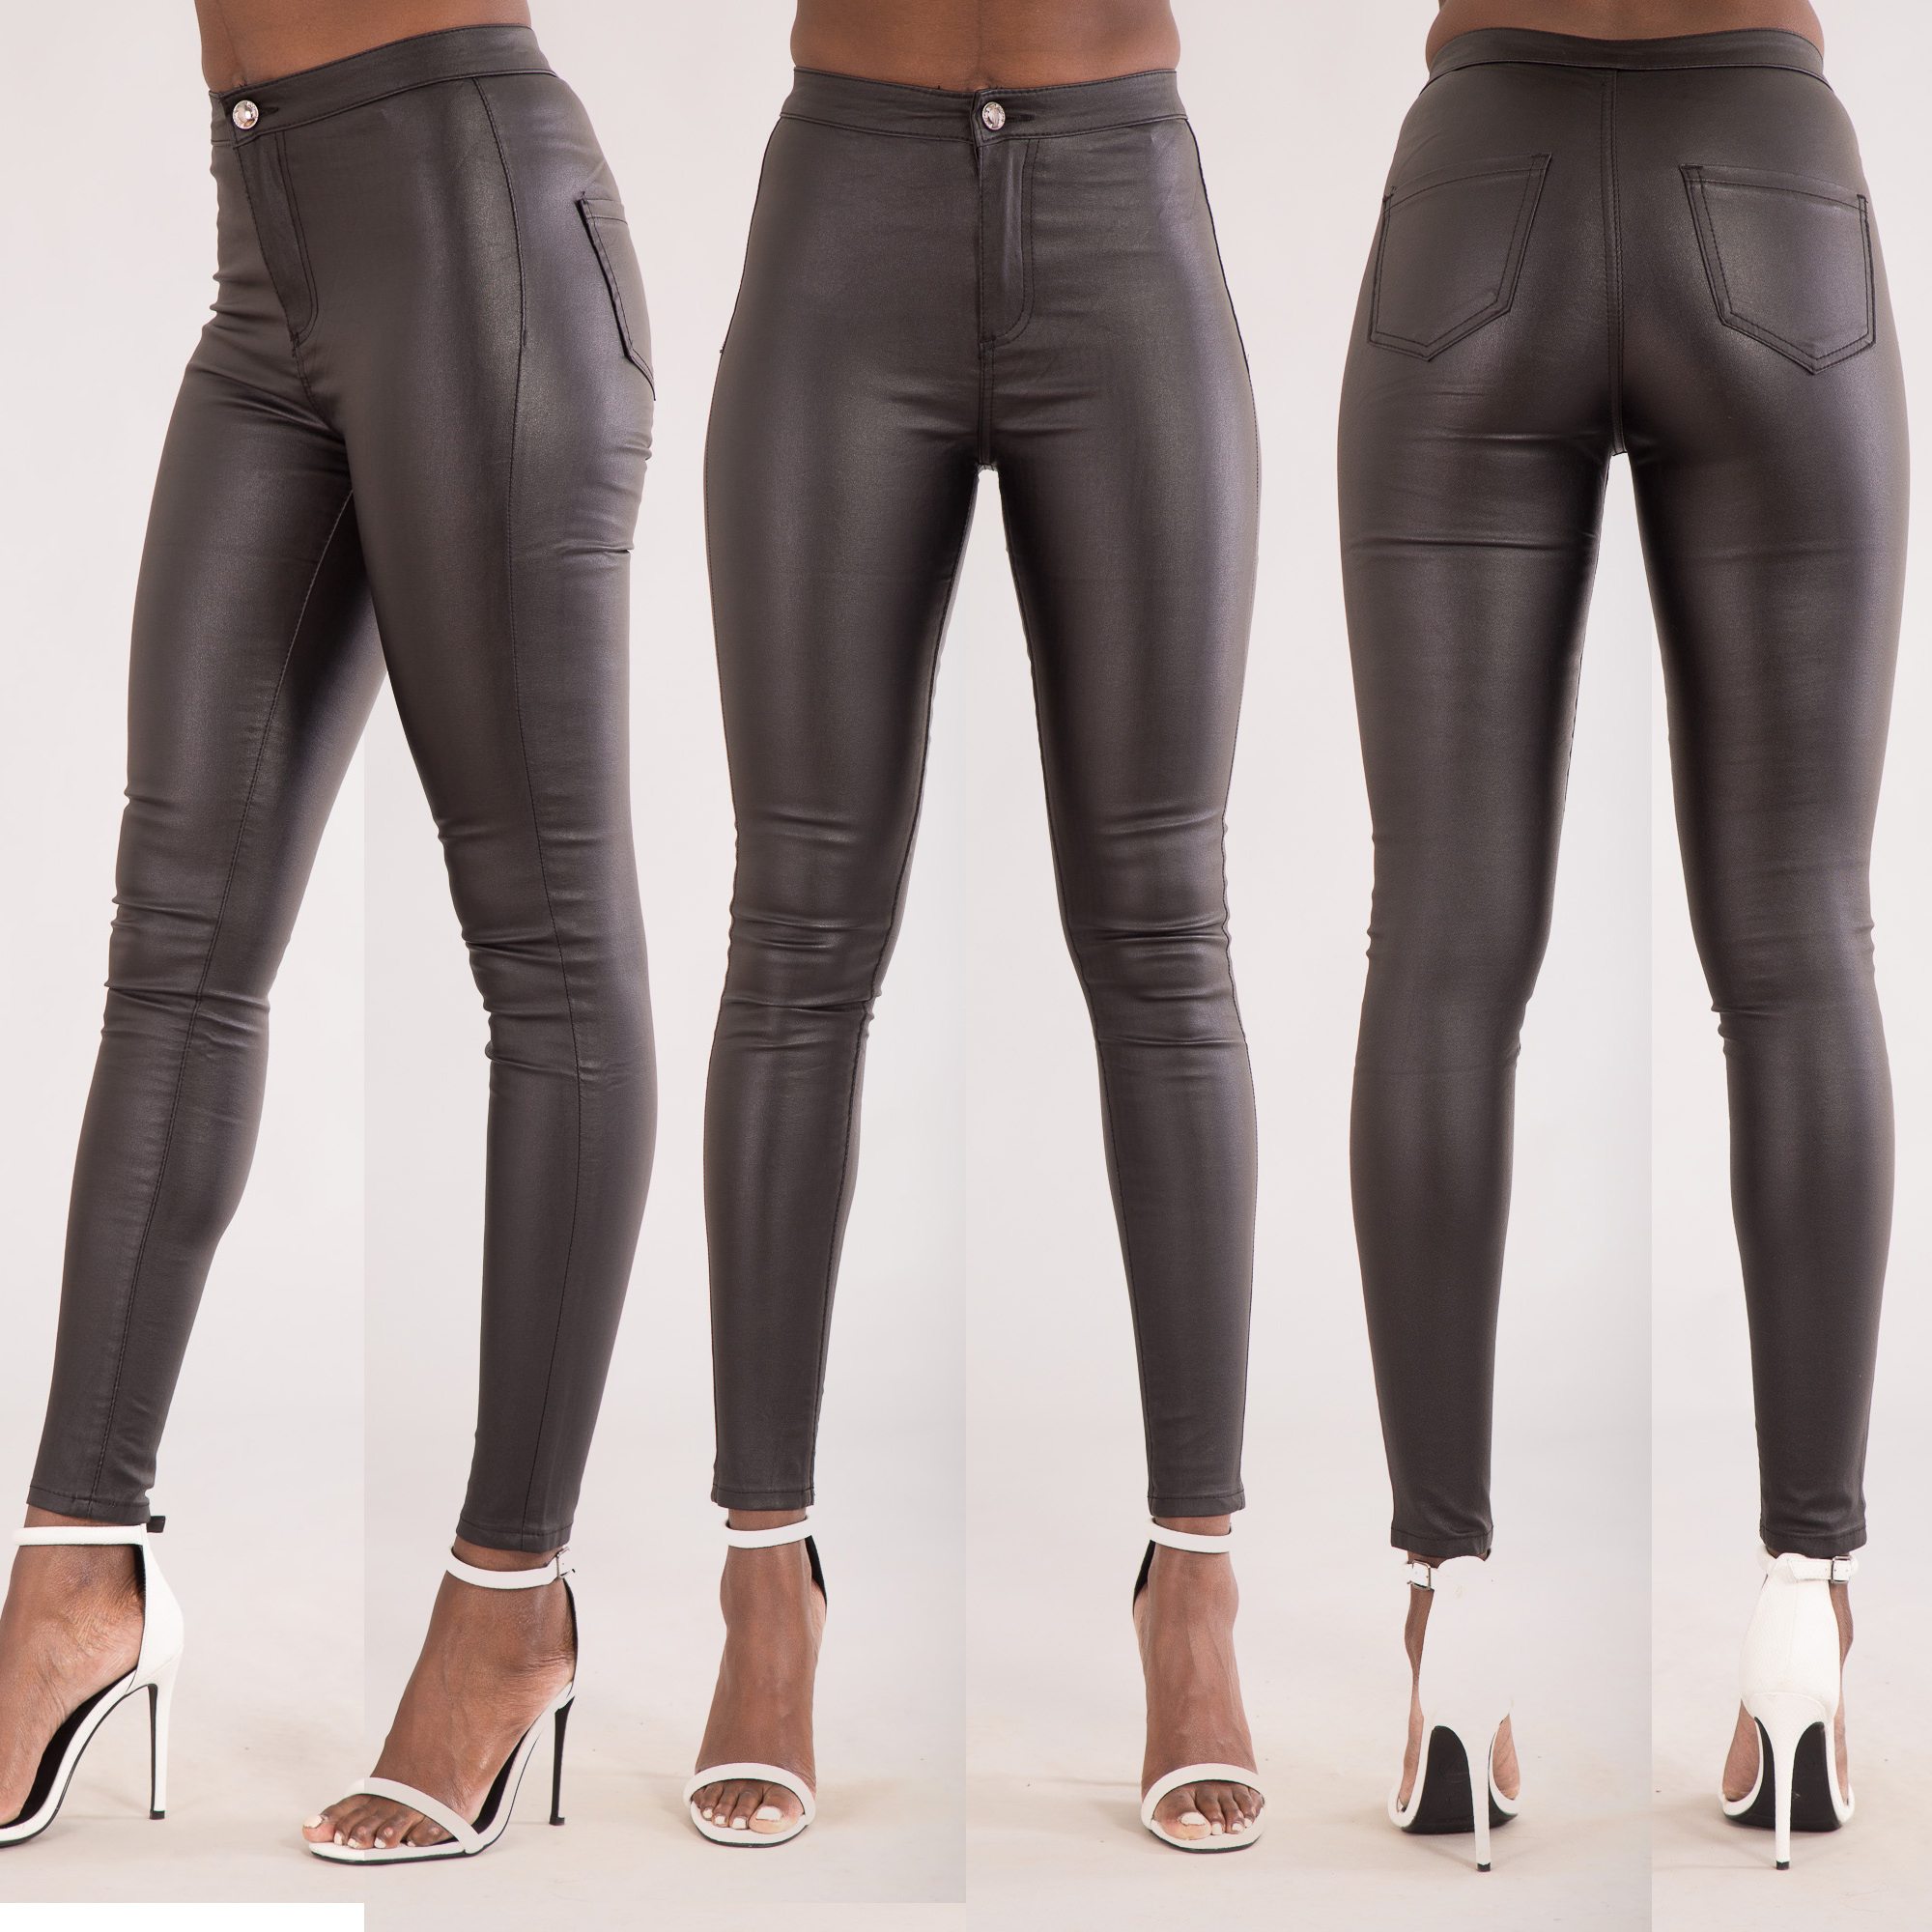 NEW WOMENS LEATHER LOOK JEANS SEXY TROUSERS LADIES BLACK SLIM FIT SIZE ...